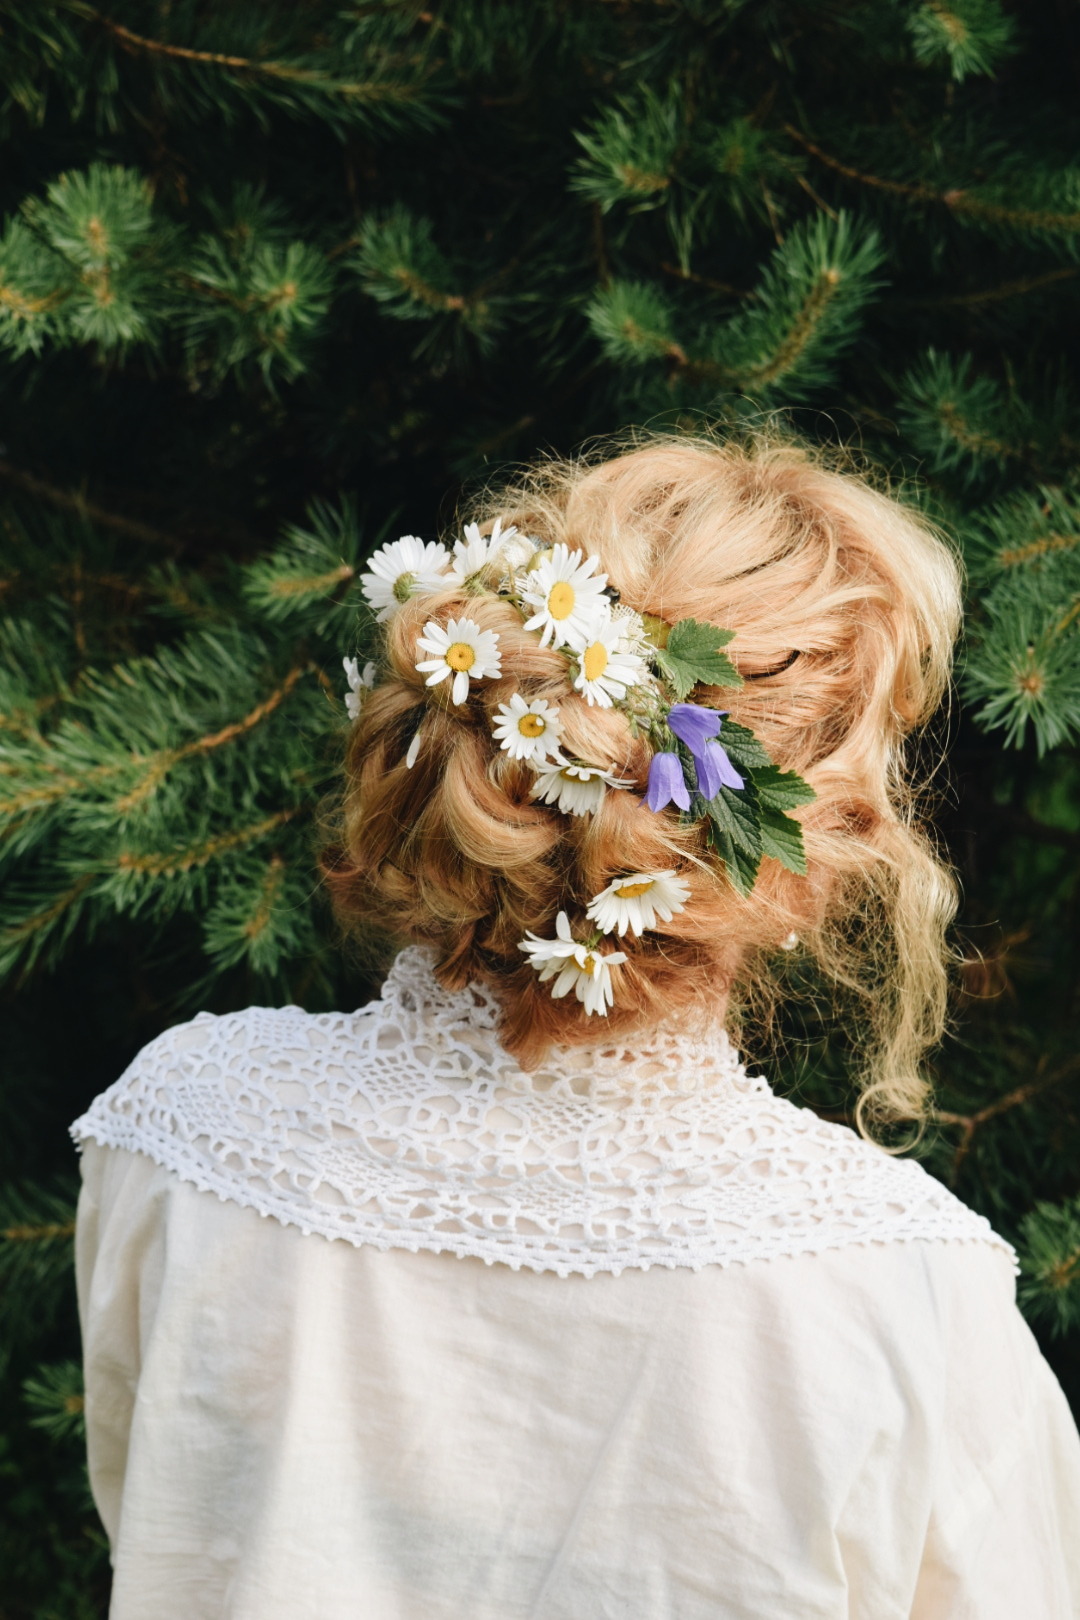 woman with braided hair and flowers